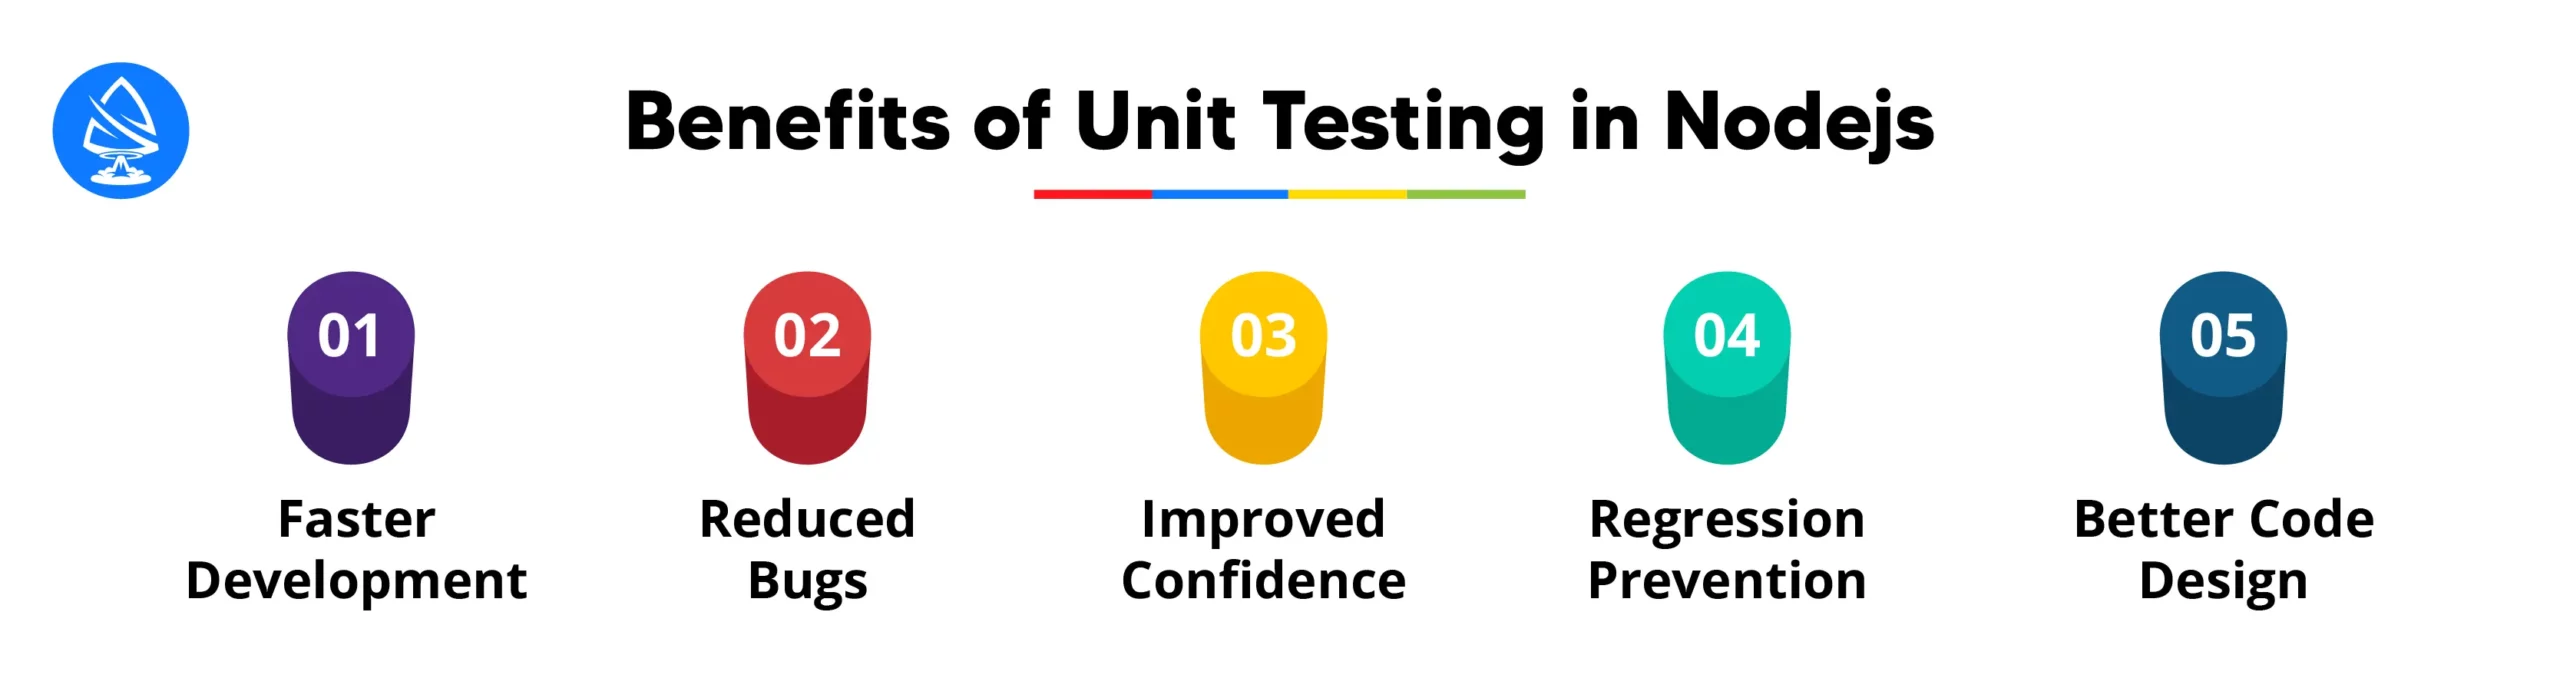 Benefits of Implementing Unit Testing 